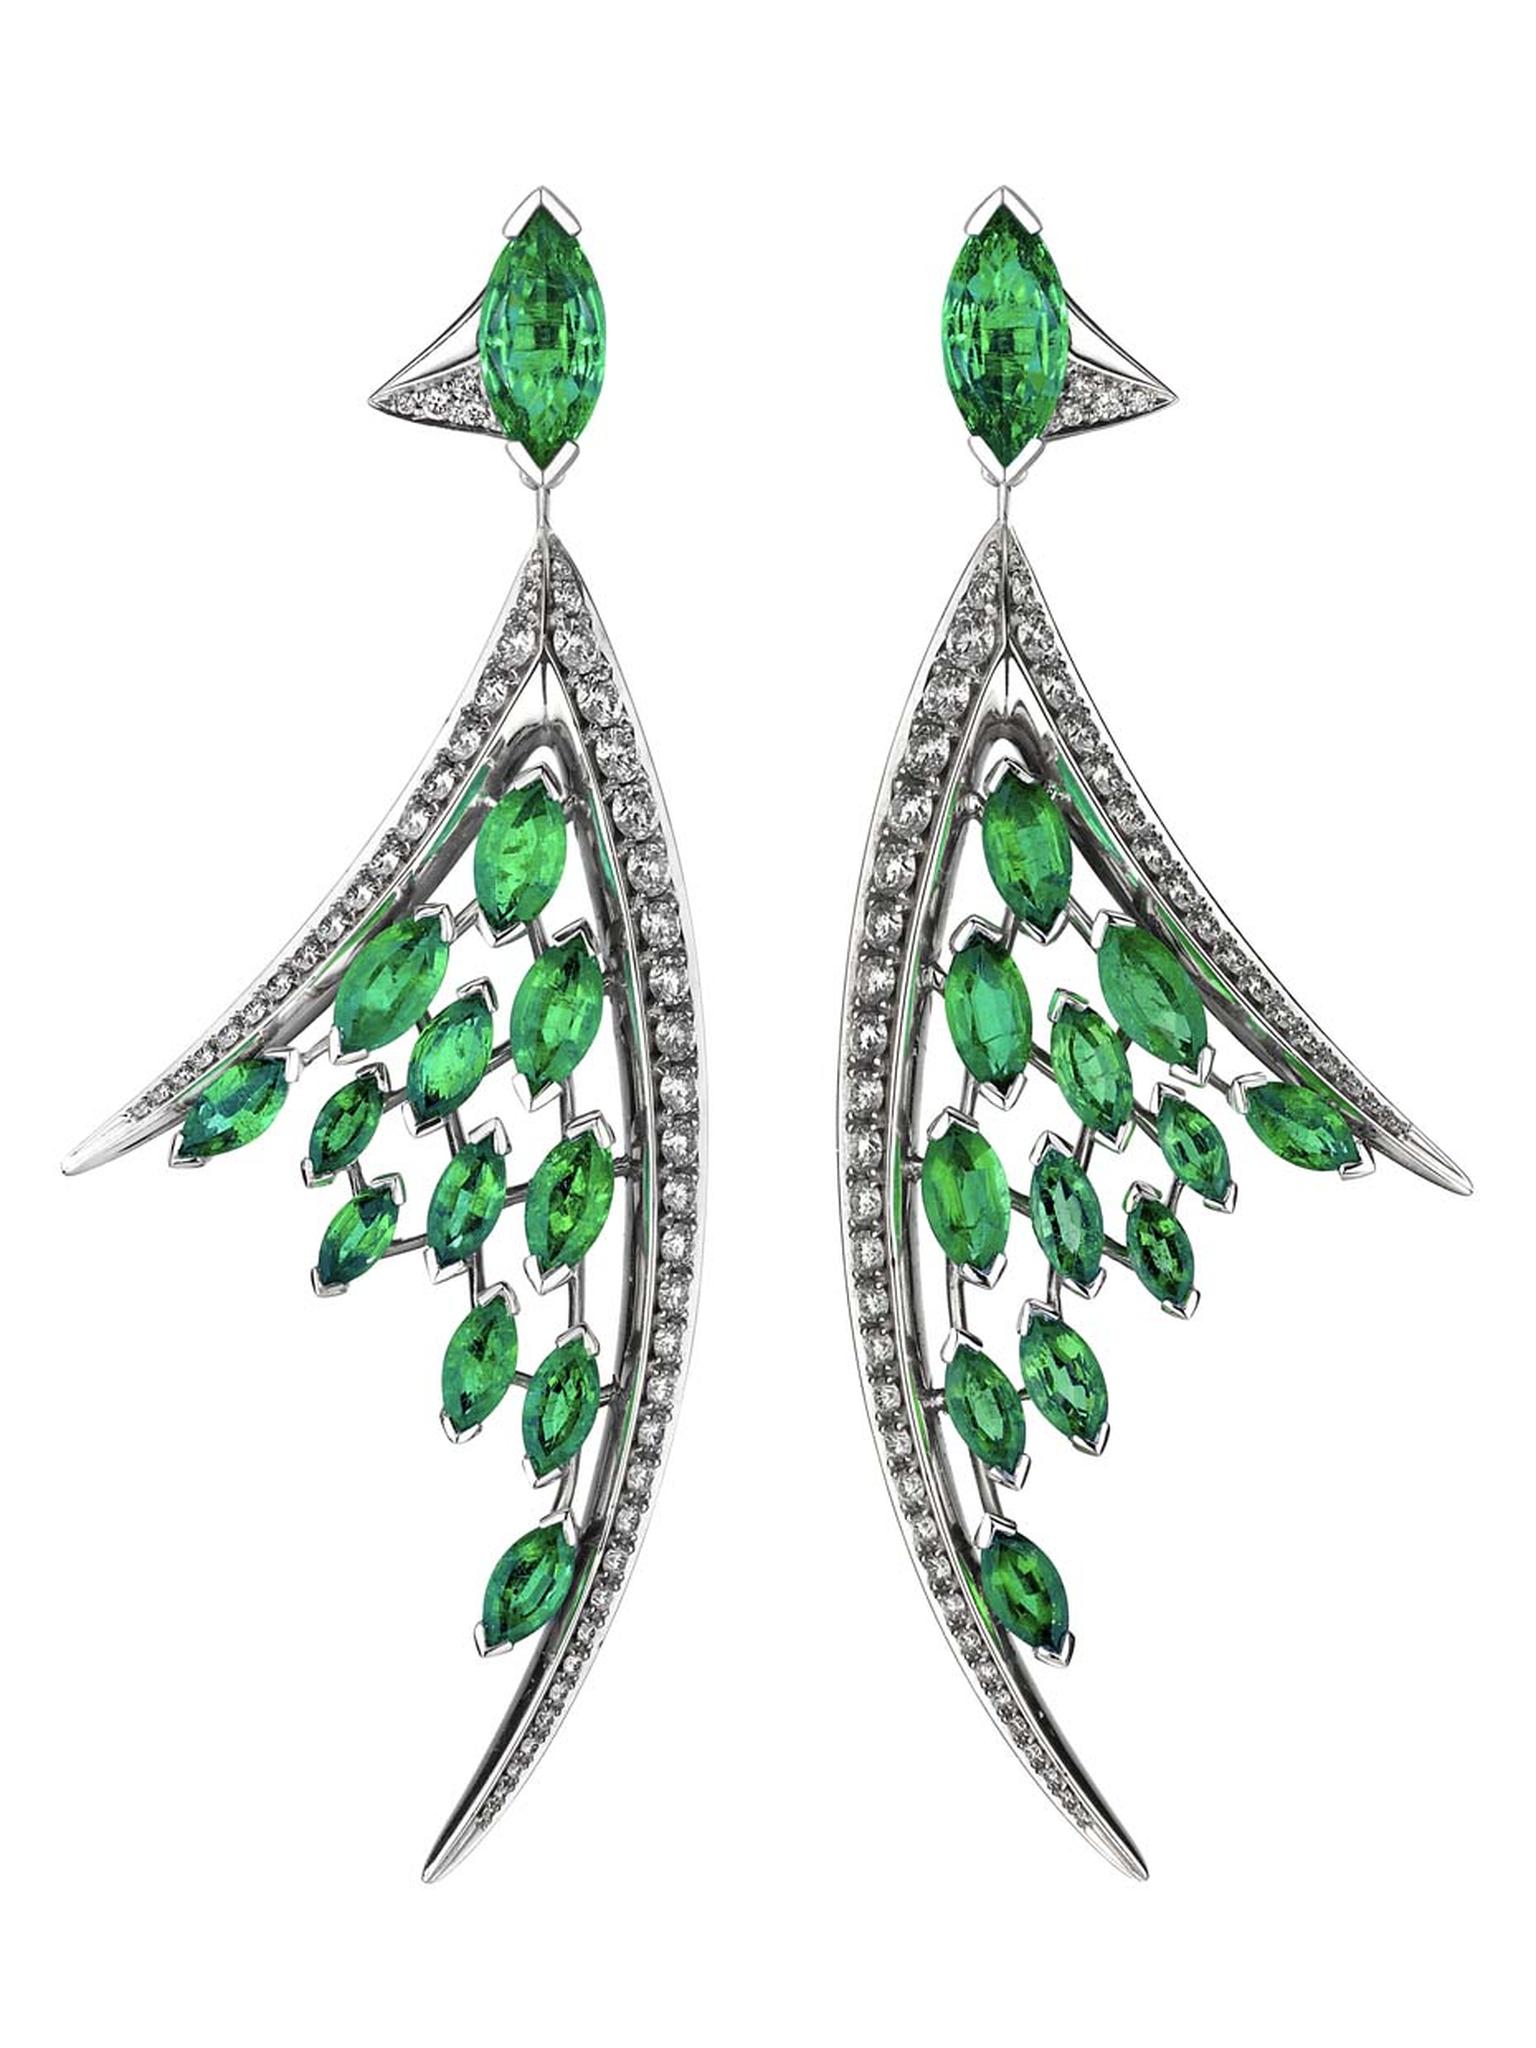 Shaun Leane Aerial collection white diamond and marquise-cut emerald earrings (£27,950.00).